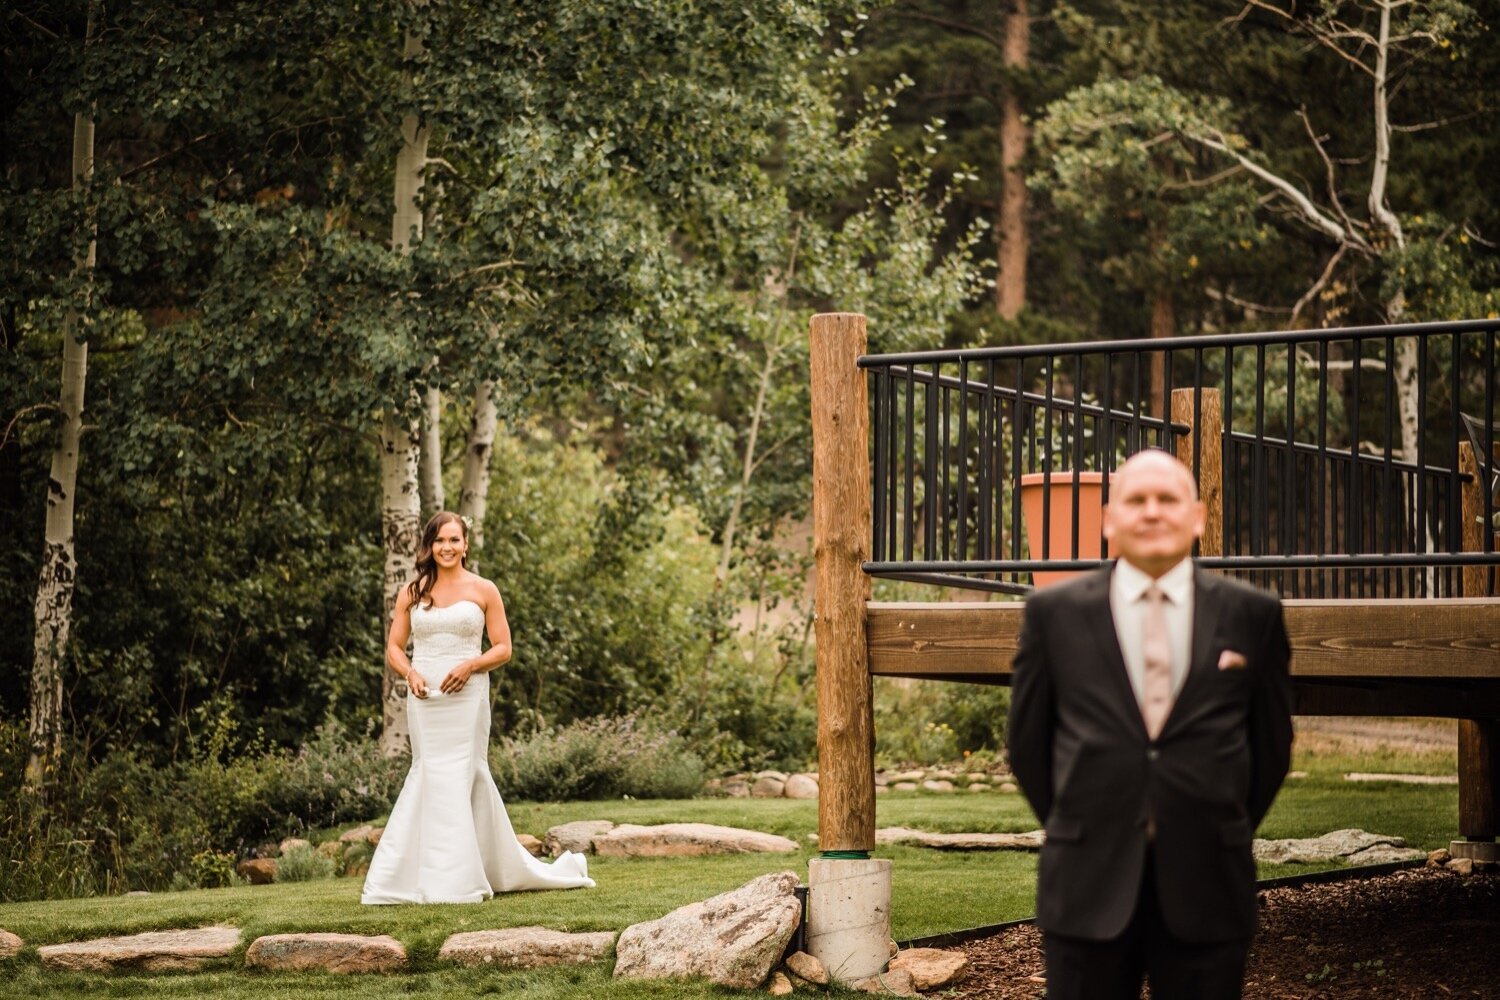  First look with dad, Father and bride first look, Summer wedding, Outdoor wedding, Wedding Inspiration, Wedding ideas, Wedding Planning, Colorado Cheley Camps, Cabin Wedding, Lodge Wedding, Mountain Wedding, Colorado Wedding Planner, Colorado Mounta